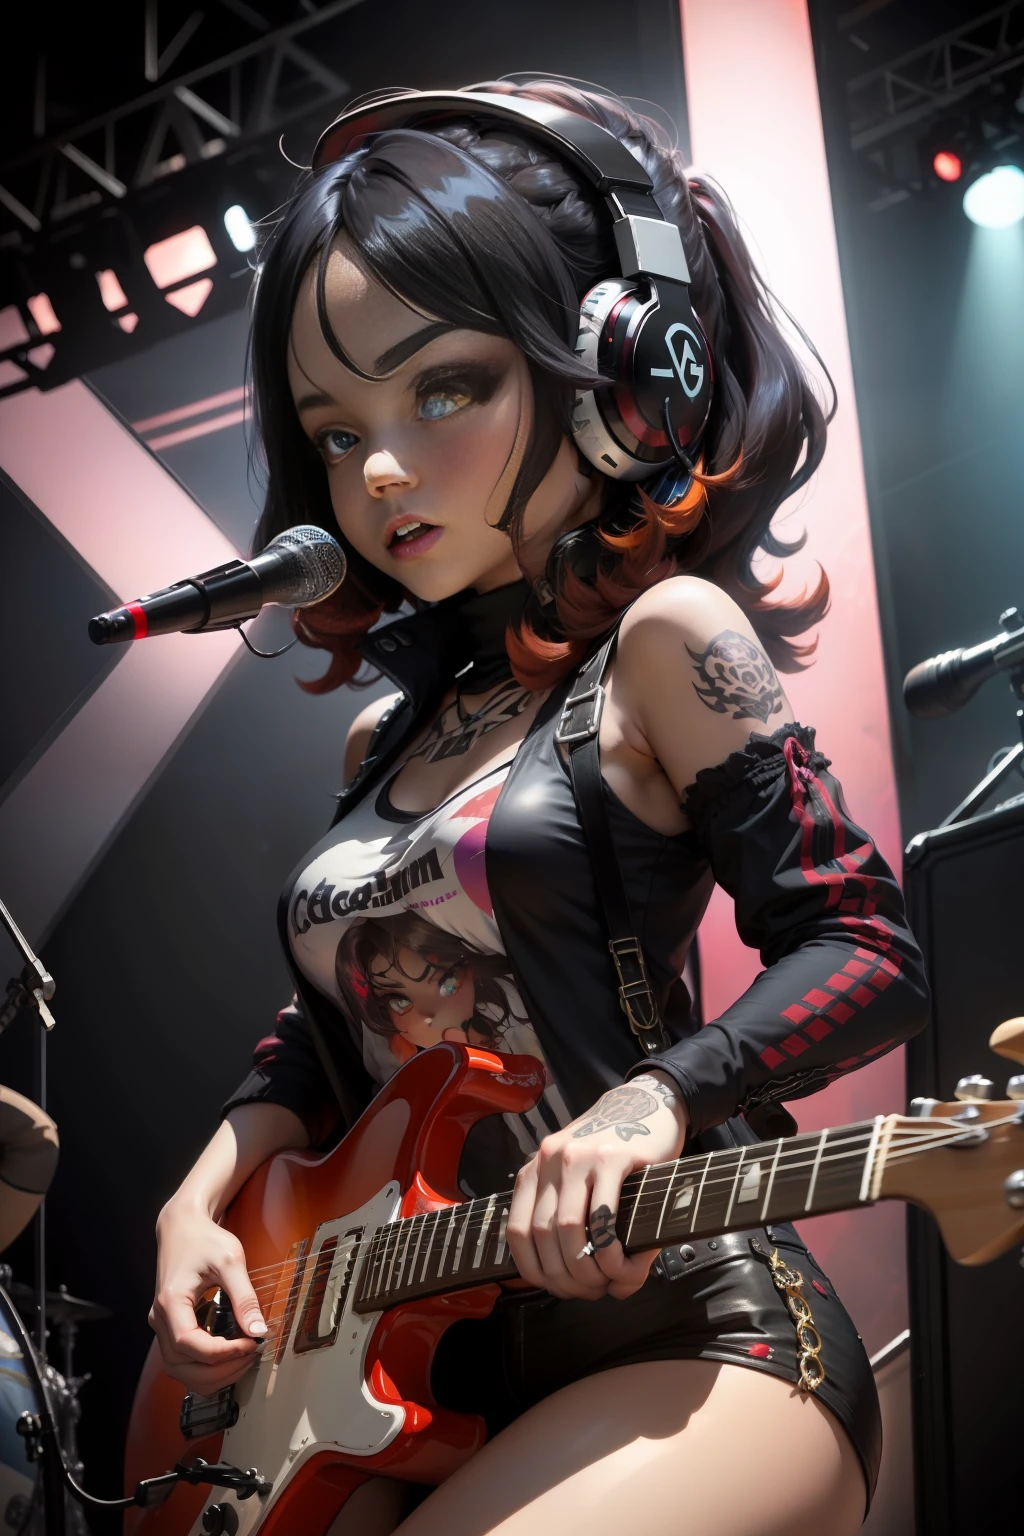 16k Ultra HD Vivid Colors Masterpiece Ultra Resolution Cinematic Digital Art, Chibi Style, A 20 Year Old Big Head Girl, Big Black Eyes, Black Hair, Light Brown Eyes, Rock Clothes, Tattoo on Her Arm, Standing Playing Colorful Electric Guitar, Effect Out of Guitar, She's on top of a stage, with gamer headphones. Vivid colors, vibrant colors, spicy colors, cinematic RAW light best ultra HD quality.